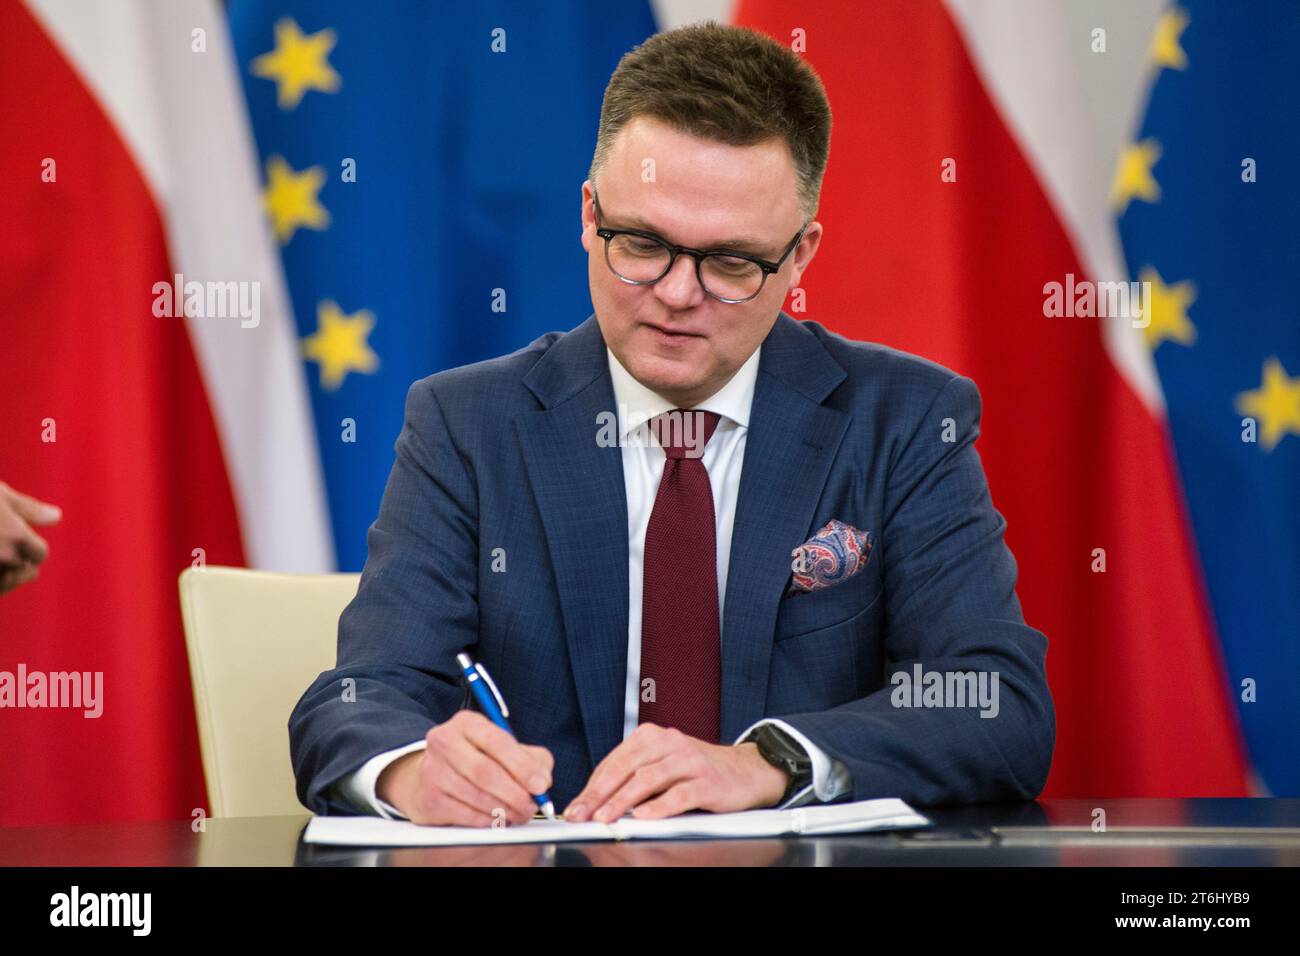 Szymon Holownia, head of the Poland 2050 party, signs the coalition agreement in the Parliament. The leaders of Polish opposition parties have signed a coalition agreement that lays out a road map for governing the nation over the next four years. The parties collectively won a majority of votes in last month's parliamentary election. Their candidate to be the next prime minister is Donald Tusk, a former prime minister who leads the largest of the opposition parties, the centrist Civic Platform. Tusk said the parties worked to seal their agreement a day before the Independence Day holiday, add Stock Photo